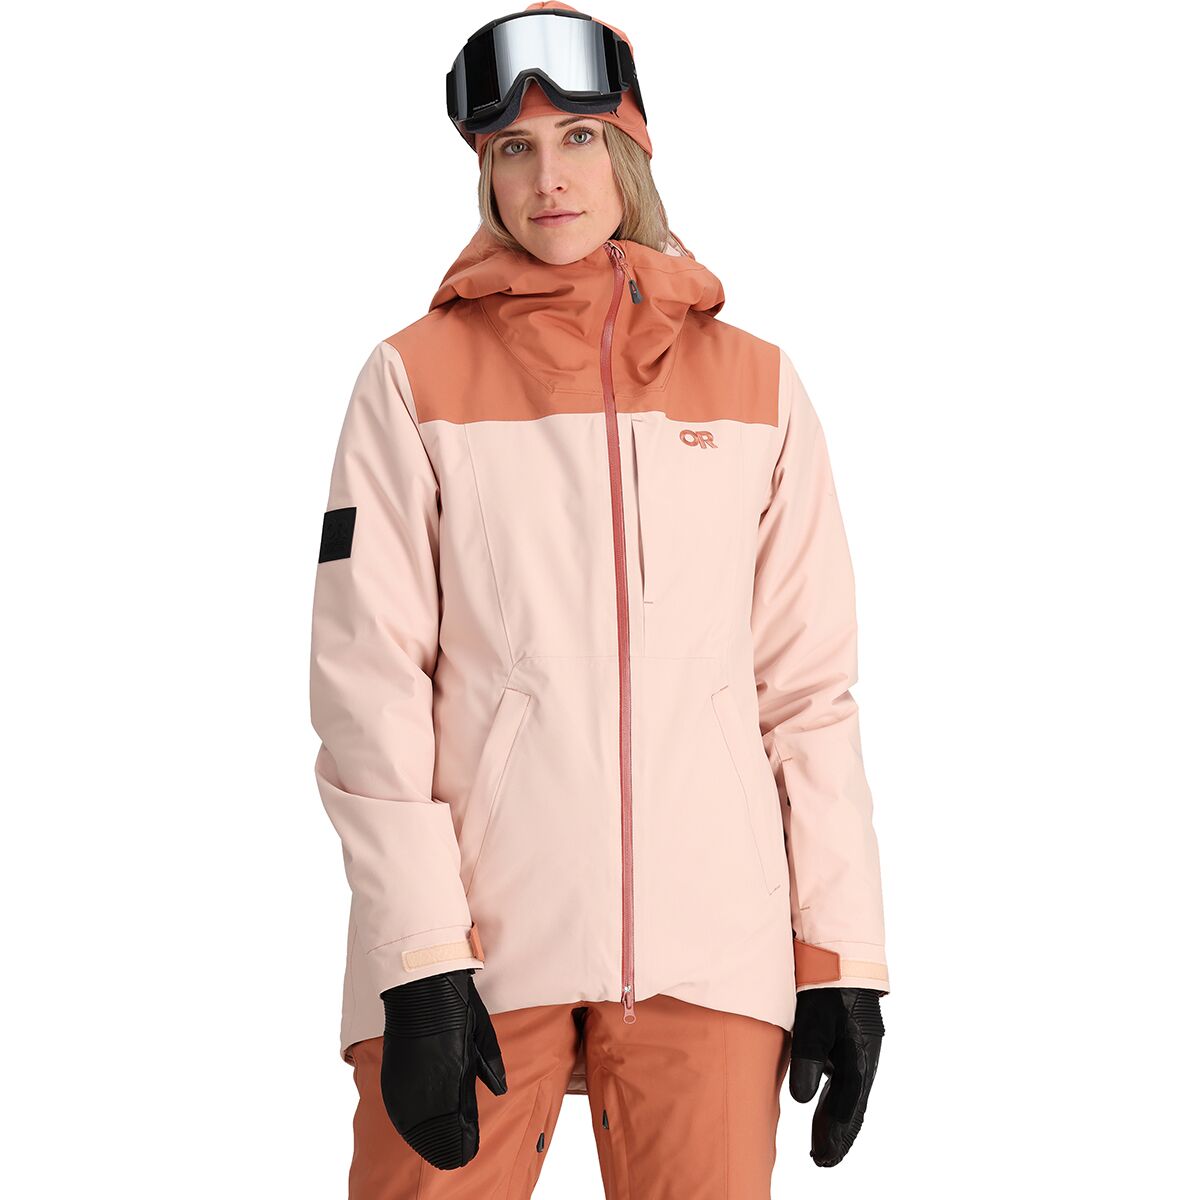 Outdoor Research Snowcrew Jacket - Women's - Clothing | Backcountry